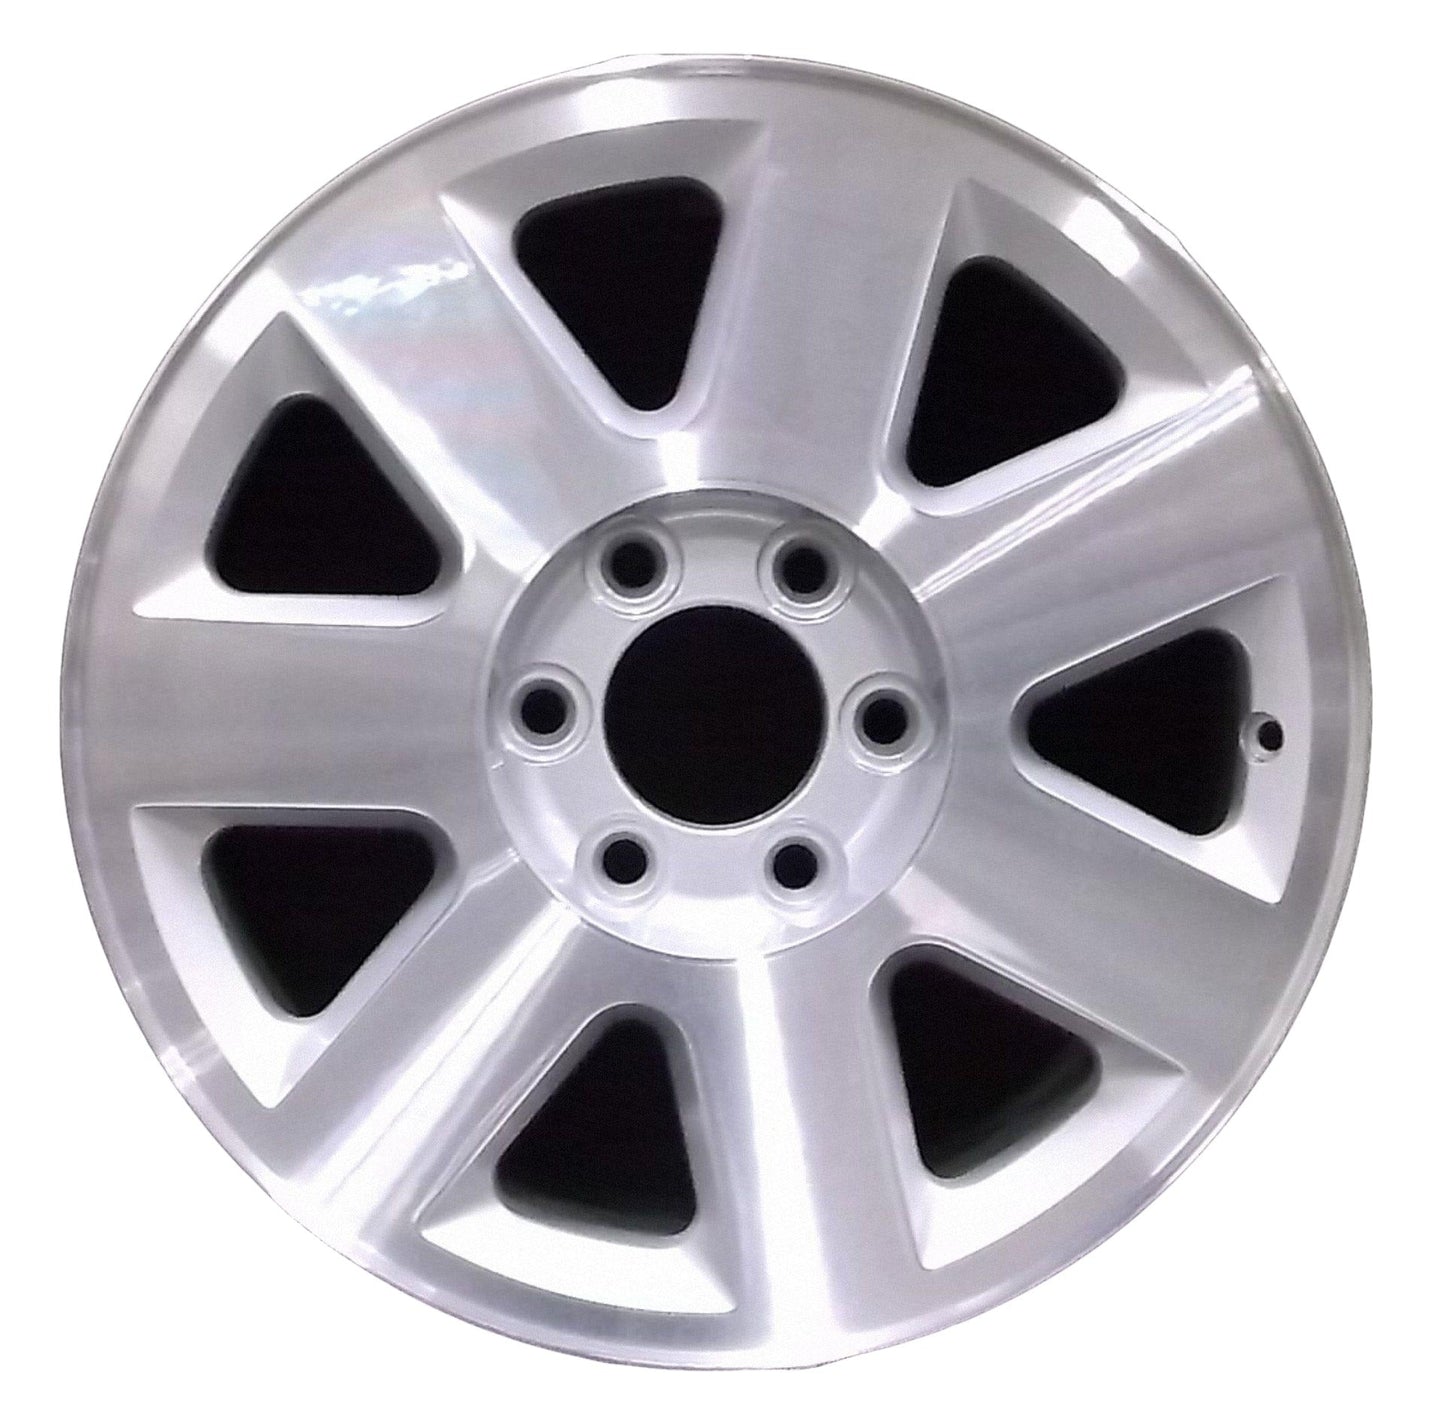 Ford F150 Truck  2005, 2006, 2007, 2008 Factory OEM Car Wheel Size 18x7.5 Alloy WAO.3606.PS02.MA